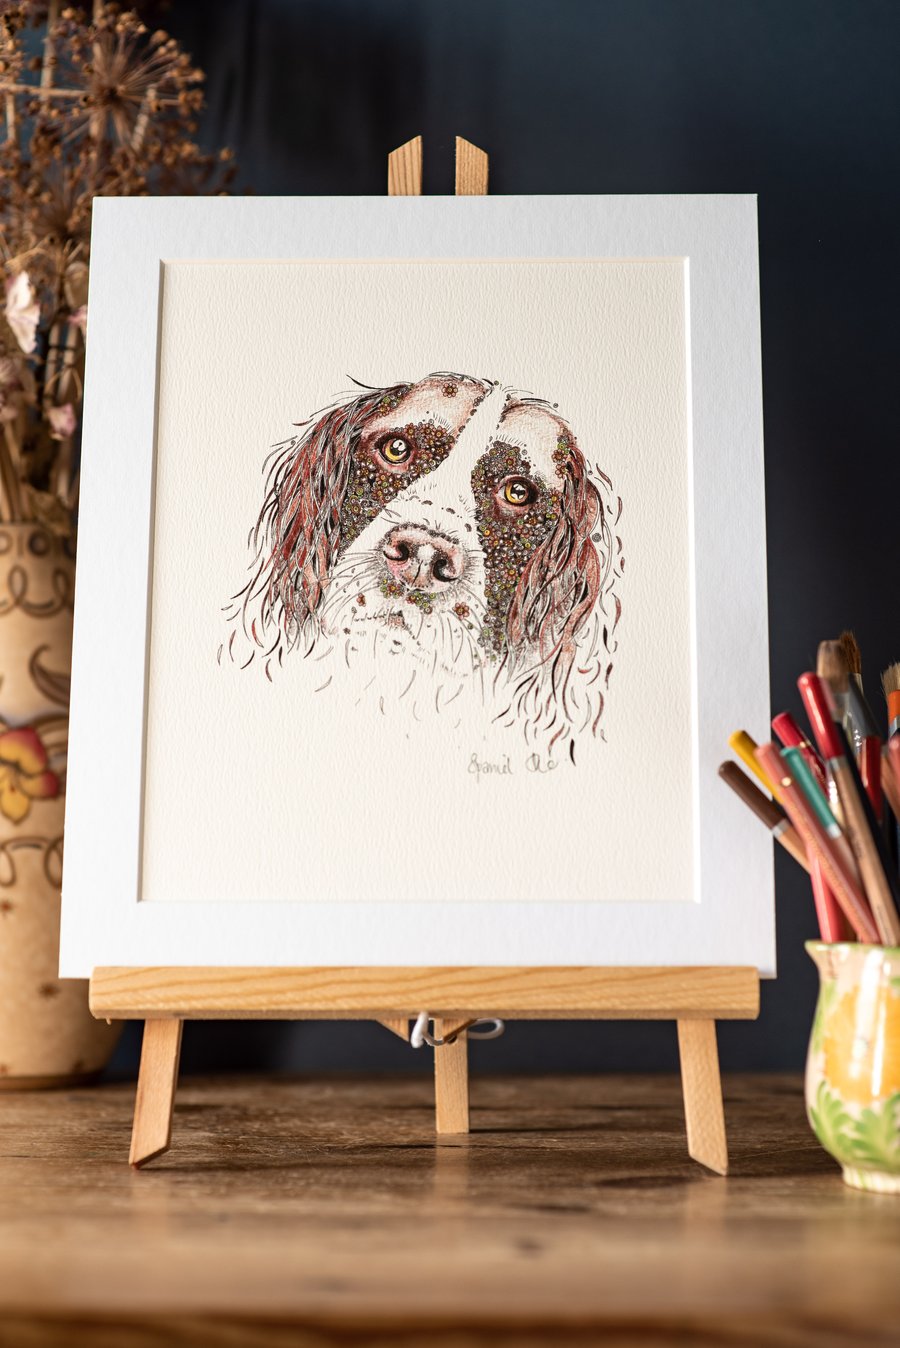 Spaniel Art Print  10 x 12” mounted, signed and ready to frame 